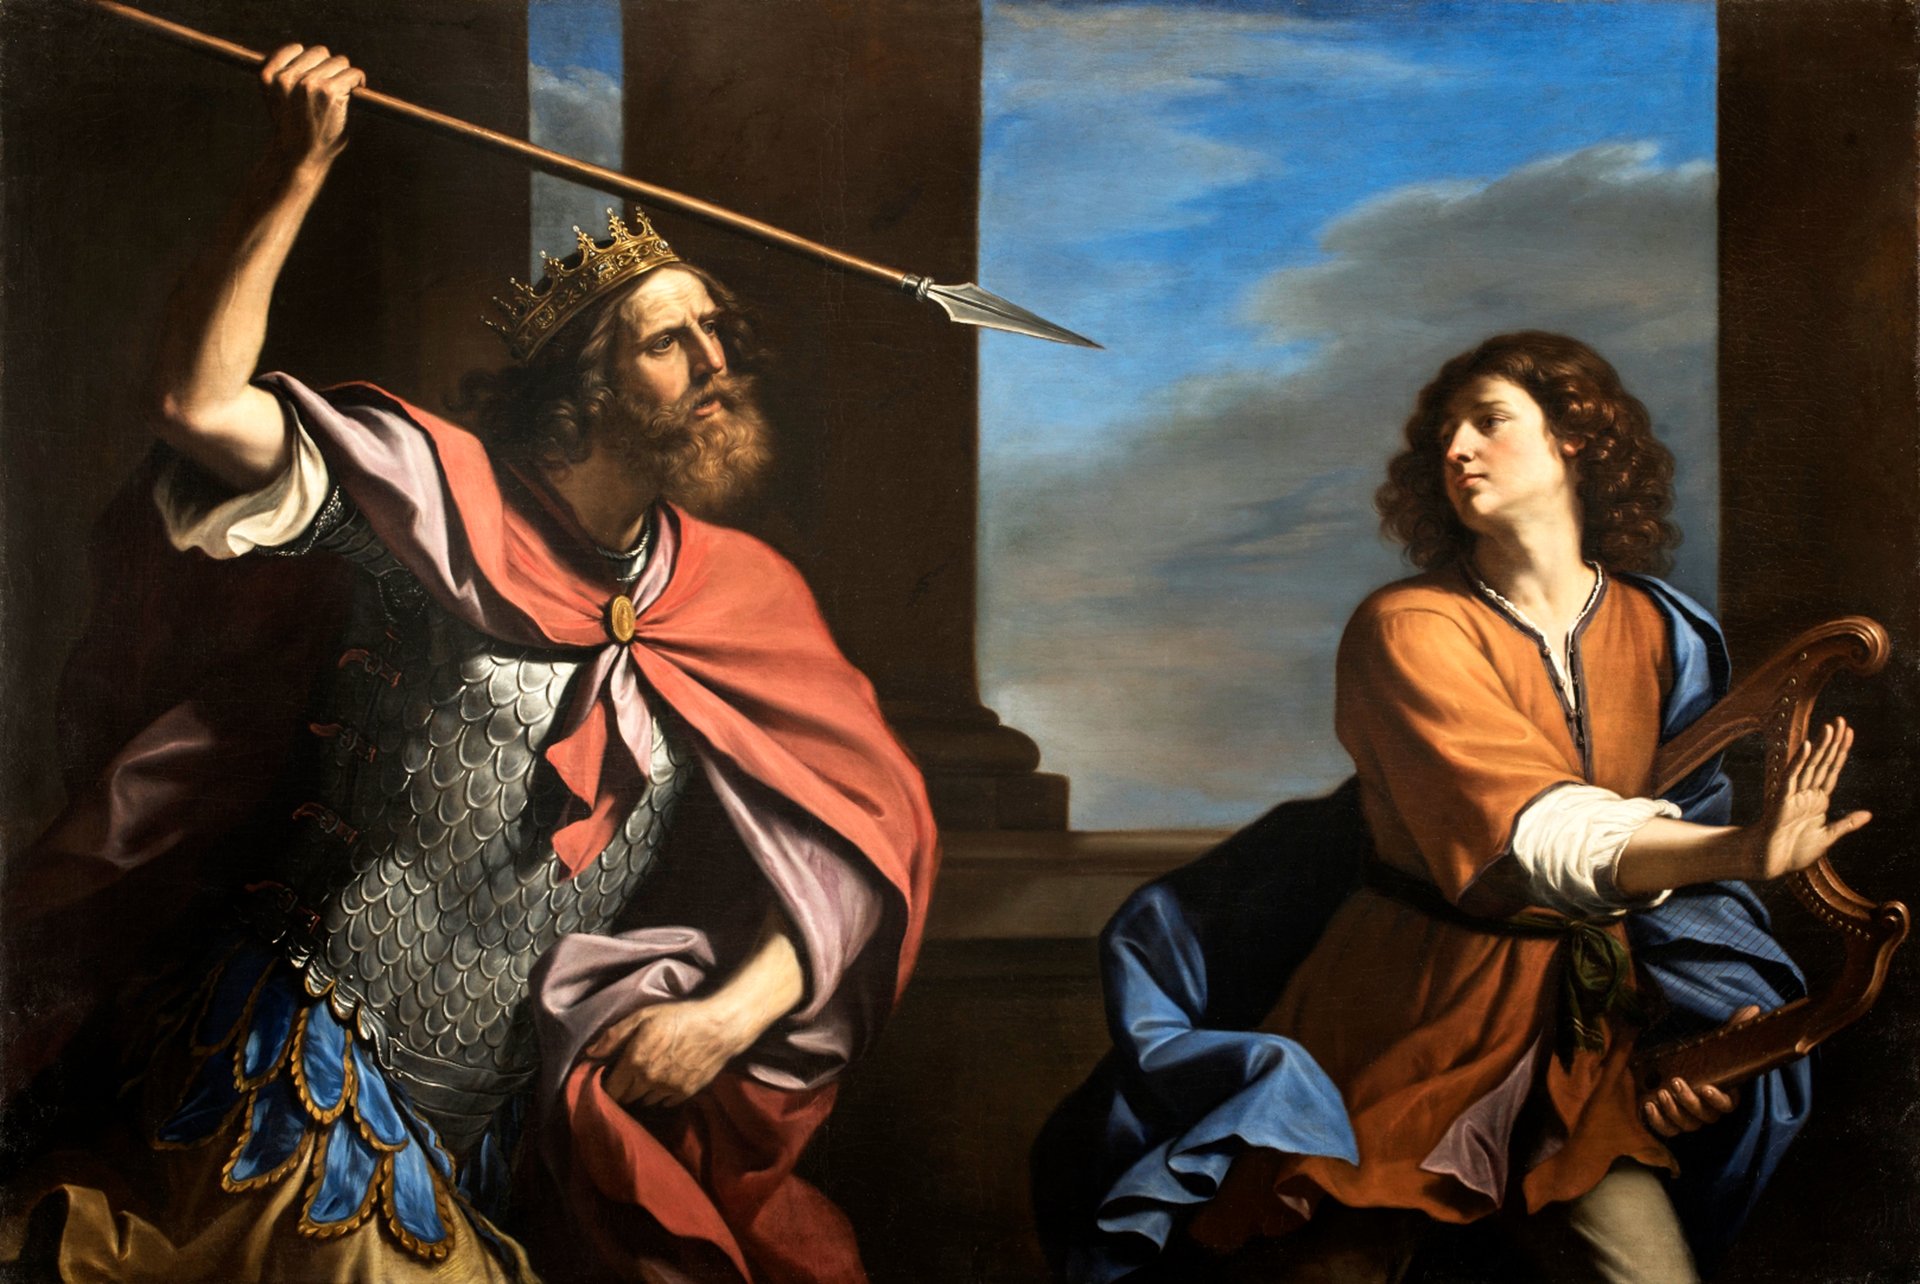 An evocative painting from 1646 by Guercino titled 'Saul Tries to Kill David with His Spear'. The scene portrays a tension-filled moment as King Saul, with an expression of fury, lunges forward with a spear aimed at David. David appears alarmed and agile, attempting to dodge the attack. The backdrop is shadowy, with muted tones, highlighting the dramatic action and emotional intensity of the foreground. The masterful brushwork captures the urgency and turbulence of the biblical narrative.